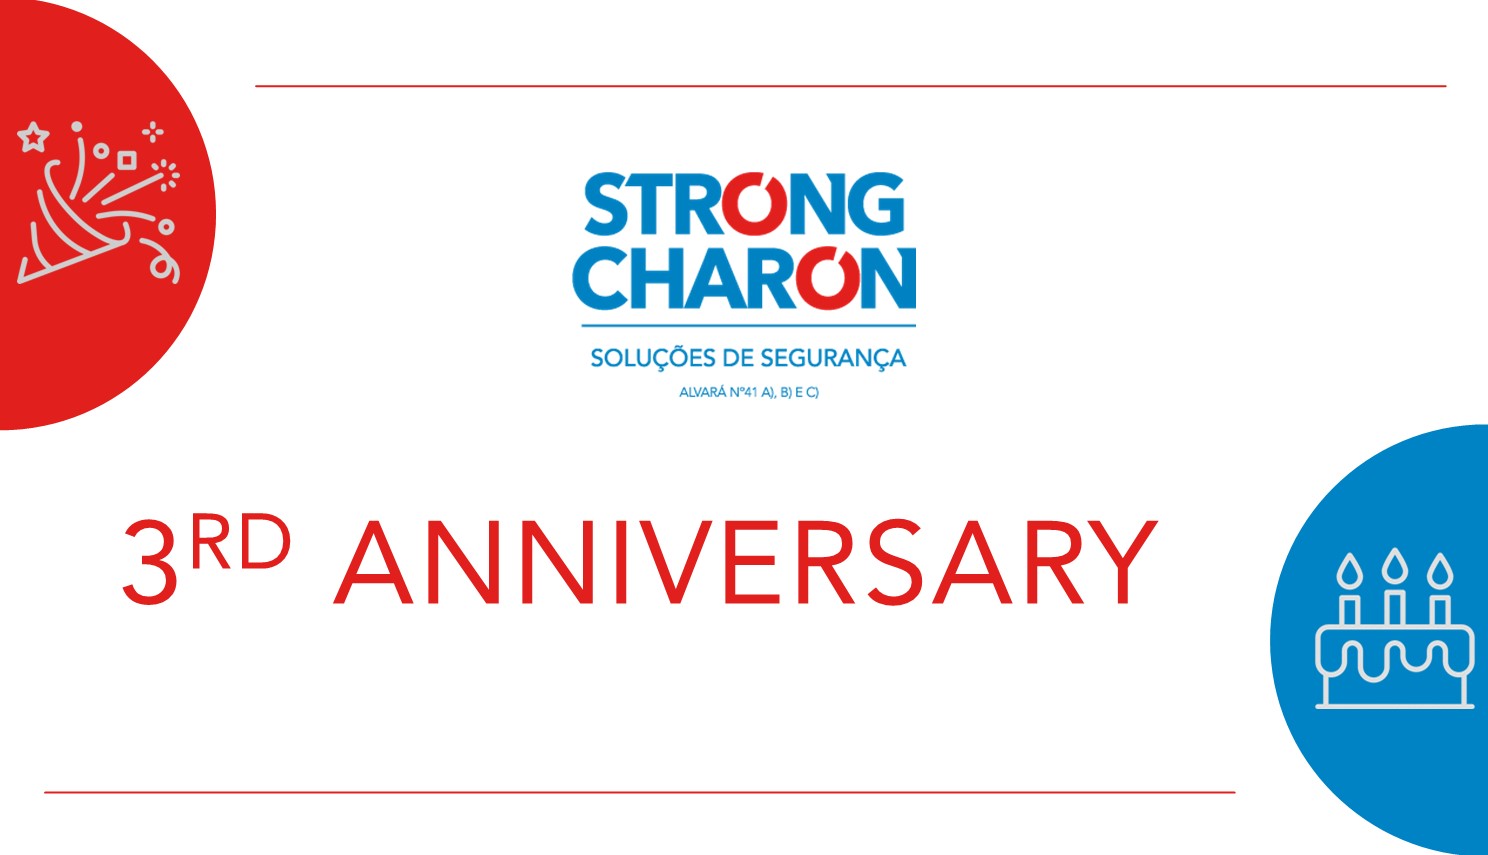 We celebrate our 3rd anniversary!